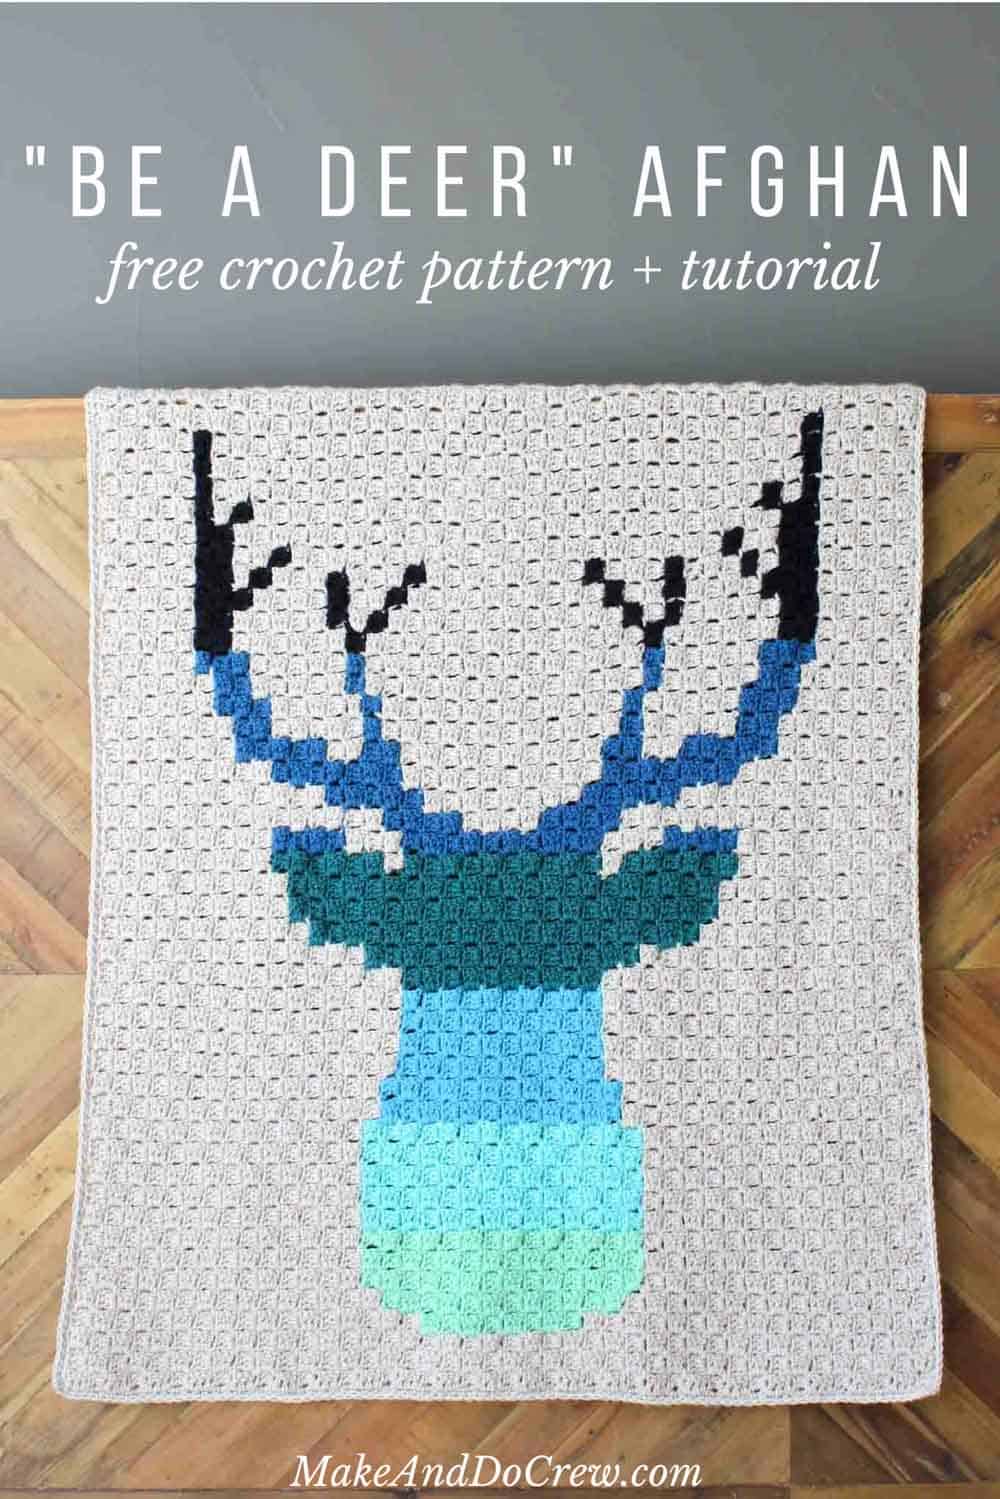 Hello ombre! This corner to corner crochet deer afghan will be a hit with your favorite baby, hipster or hunter! Download the free ombre deer c2c graph to make a baby blanket or larger throw. Made with Lion Brand Vanna's Choice yarn. | MakeAndDoCrew.com